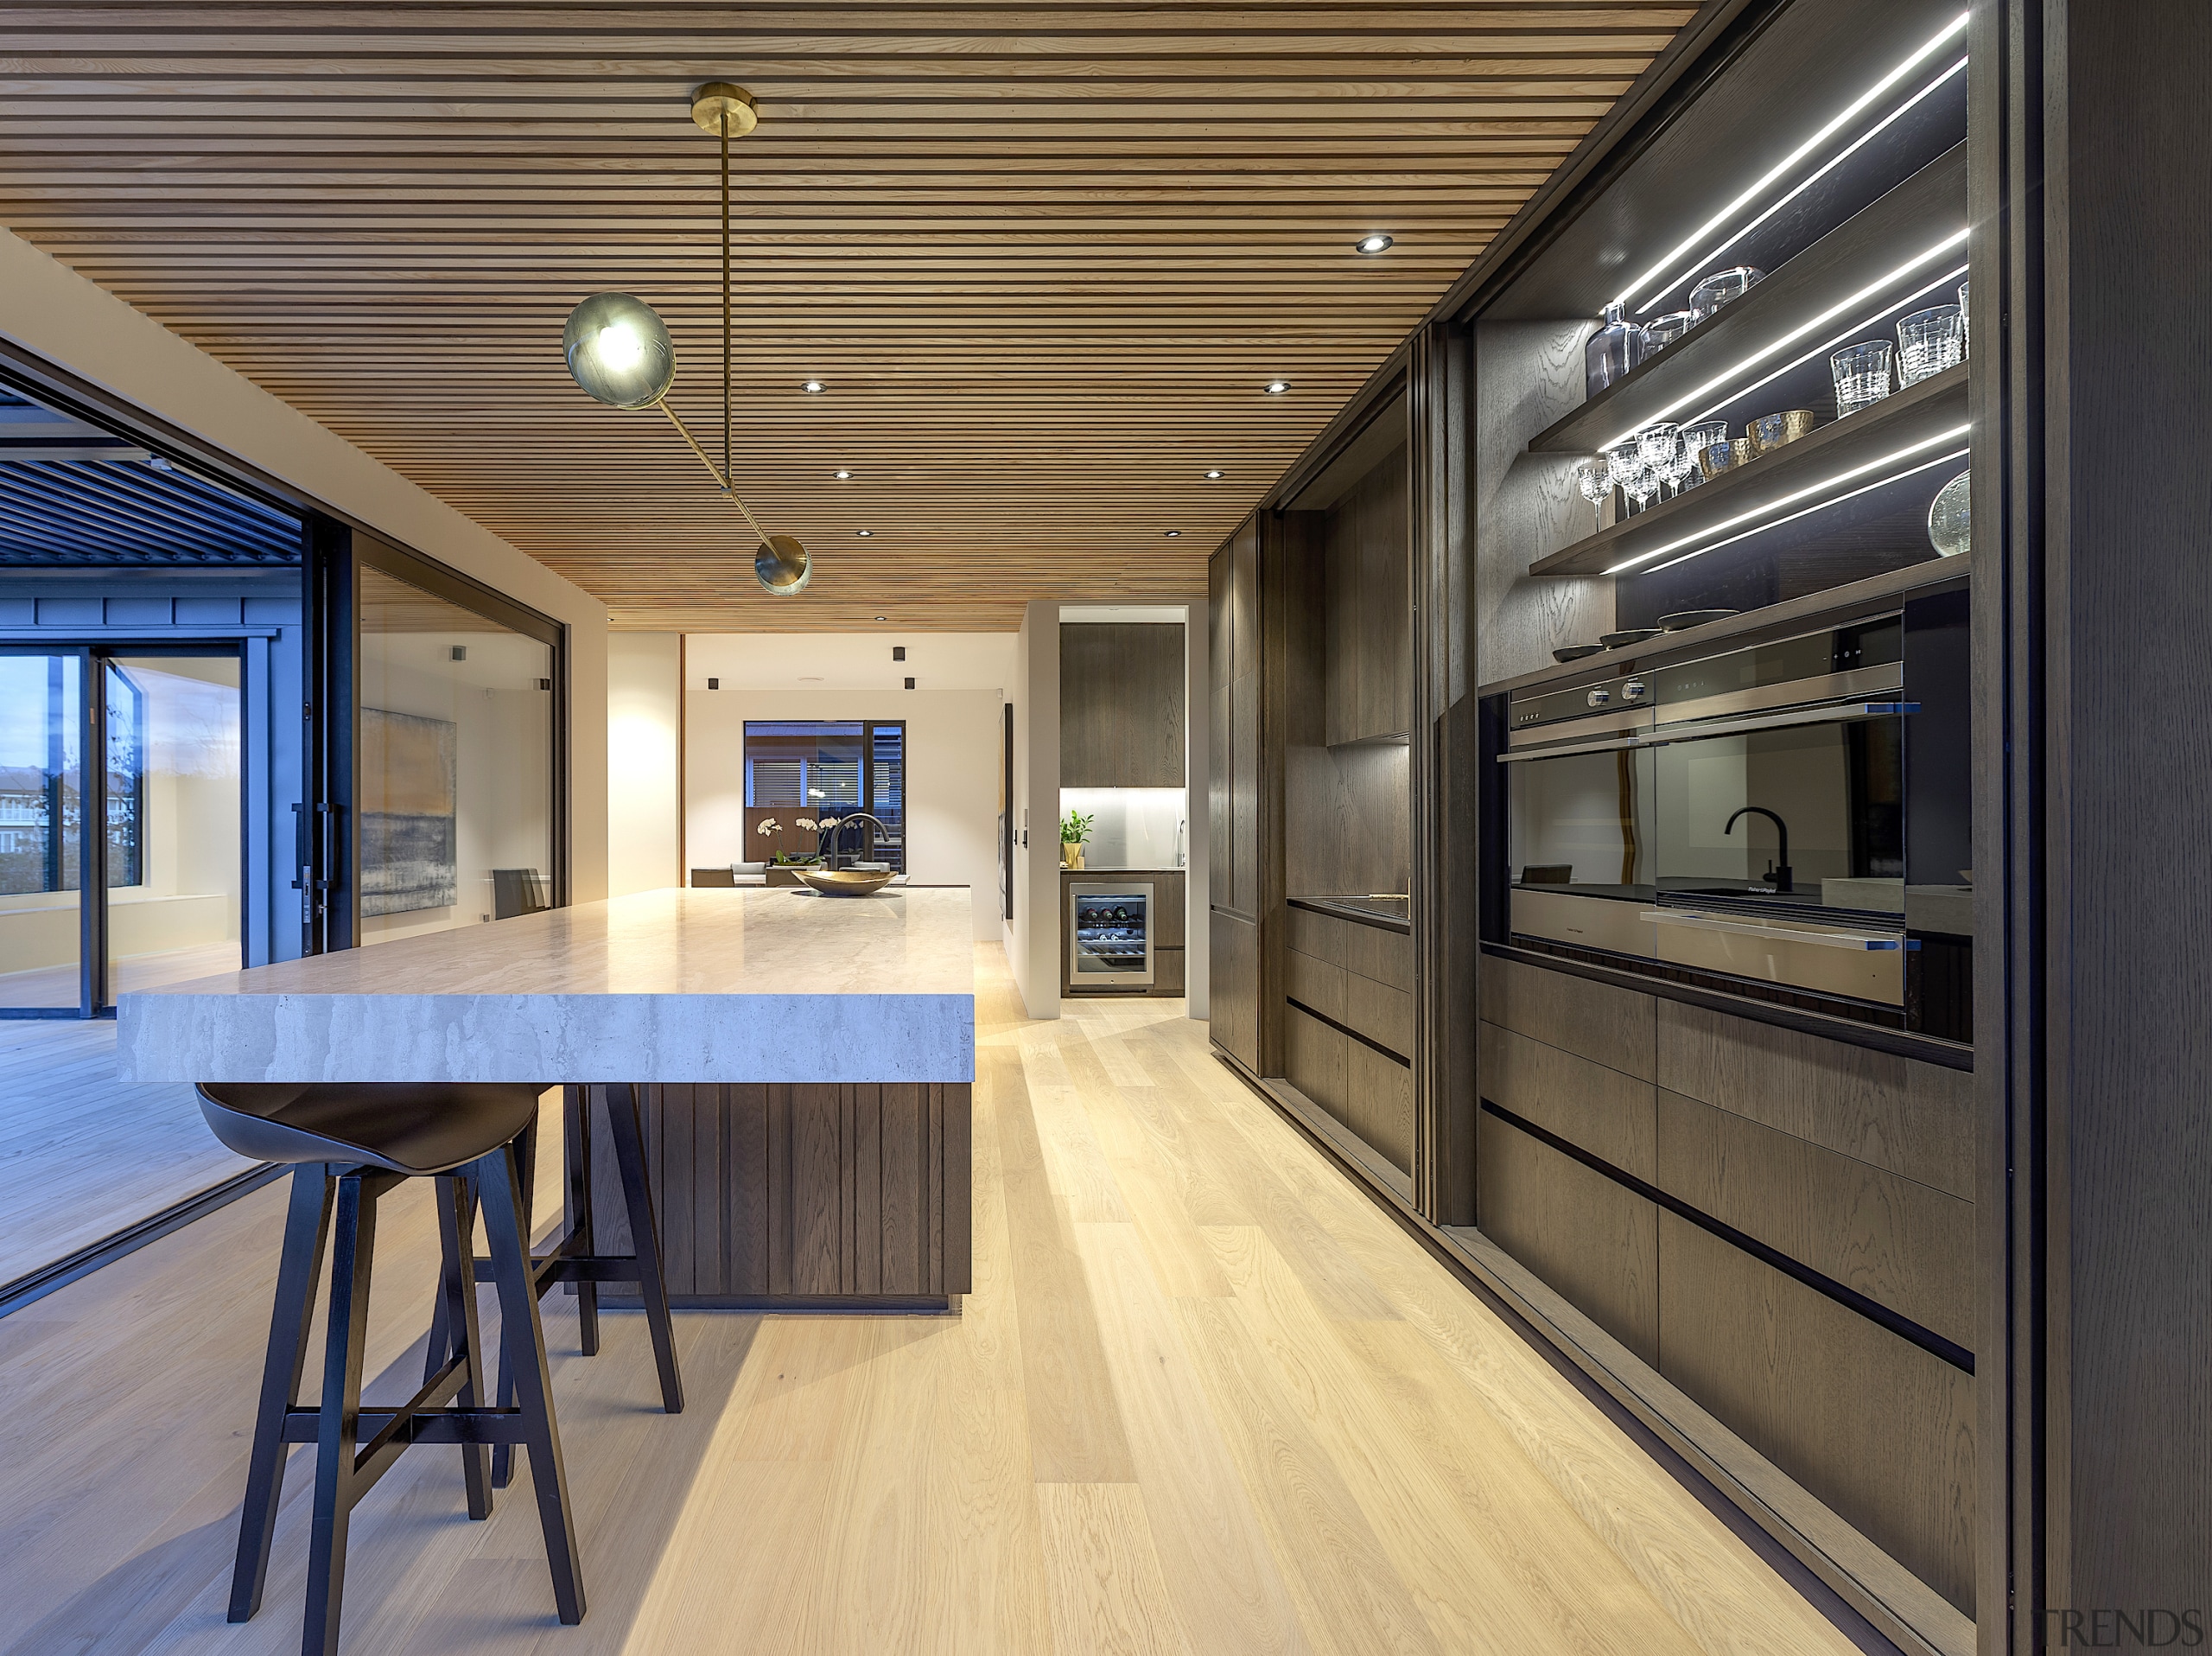 Vertical timber panelling to the island is matched architecture, building, cabinetry, ceiling, countertop, design, floor, flooring, furniture, hall, hardwood, home, house, interior design, kitchen, lighting, loft, office, plywood, property, real estate, room, table, wall, wood, wood flooring, yellow, black